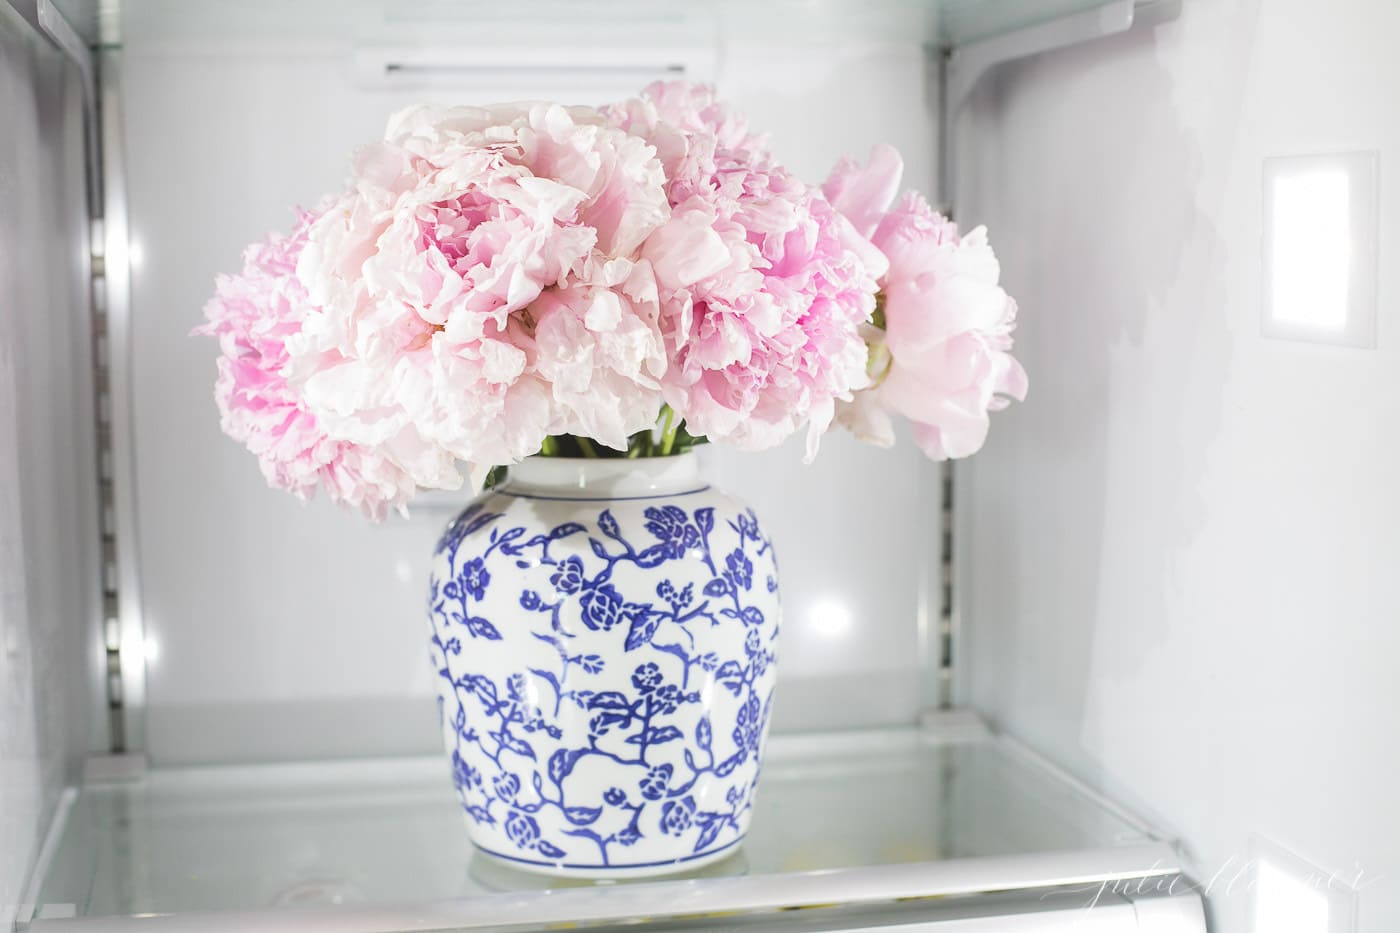 A blue and white vase inside a refrigerator, filled with a pink peony bouquet.